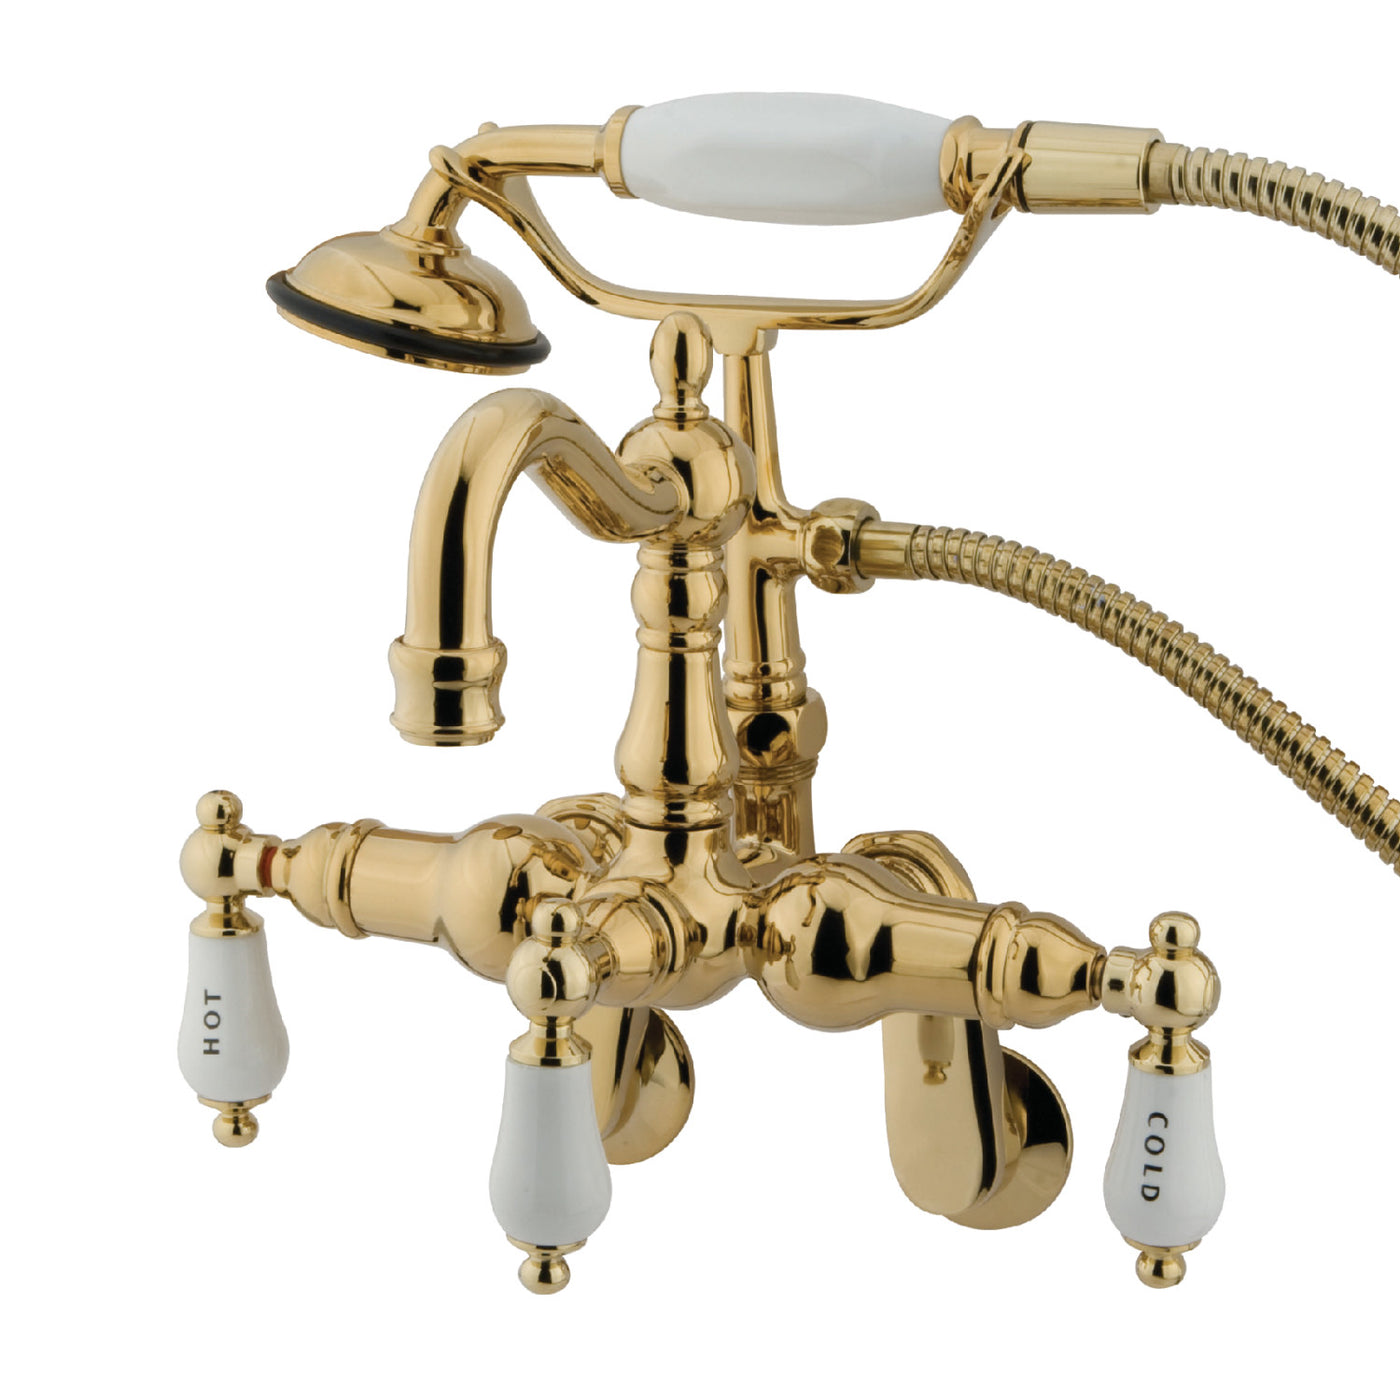 Elements of Design DT13012CL Adjustable Center Wall Mount Tub Faucet with Hand Shower, Polished Brass